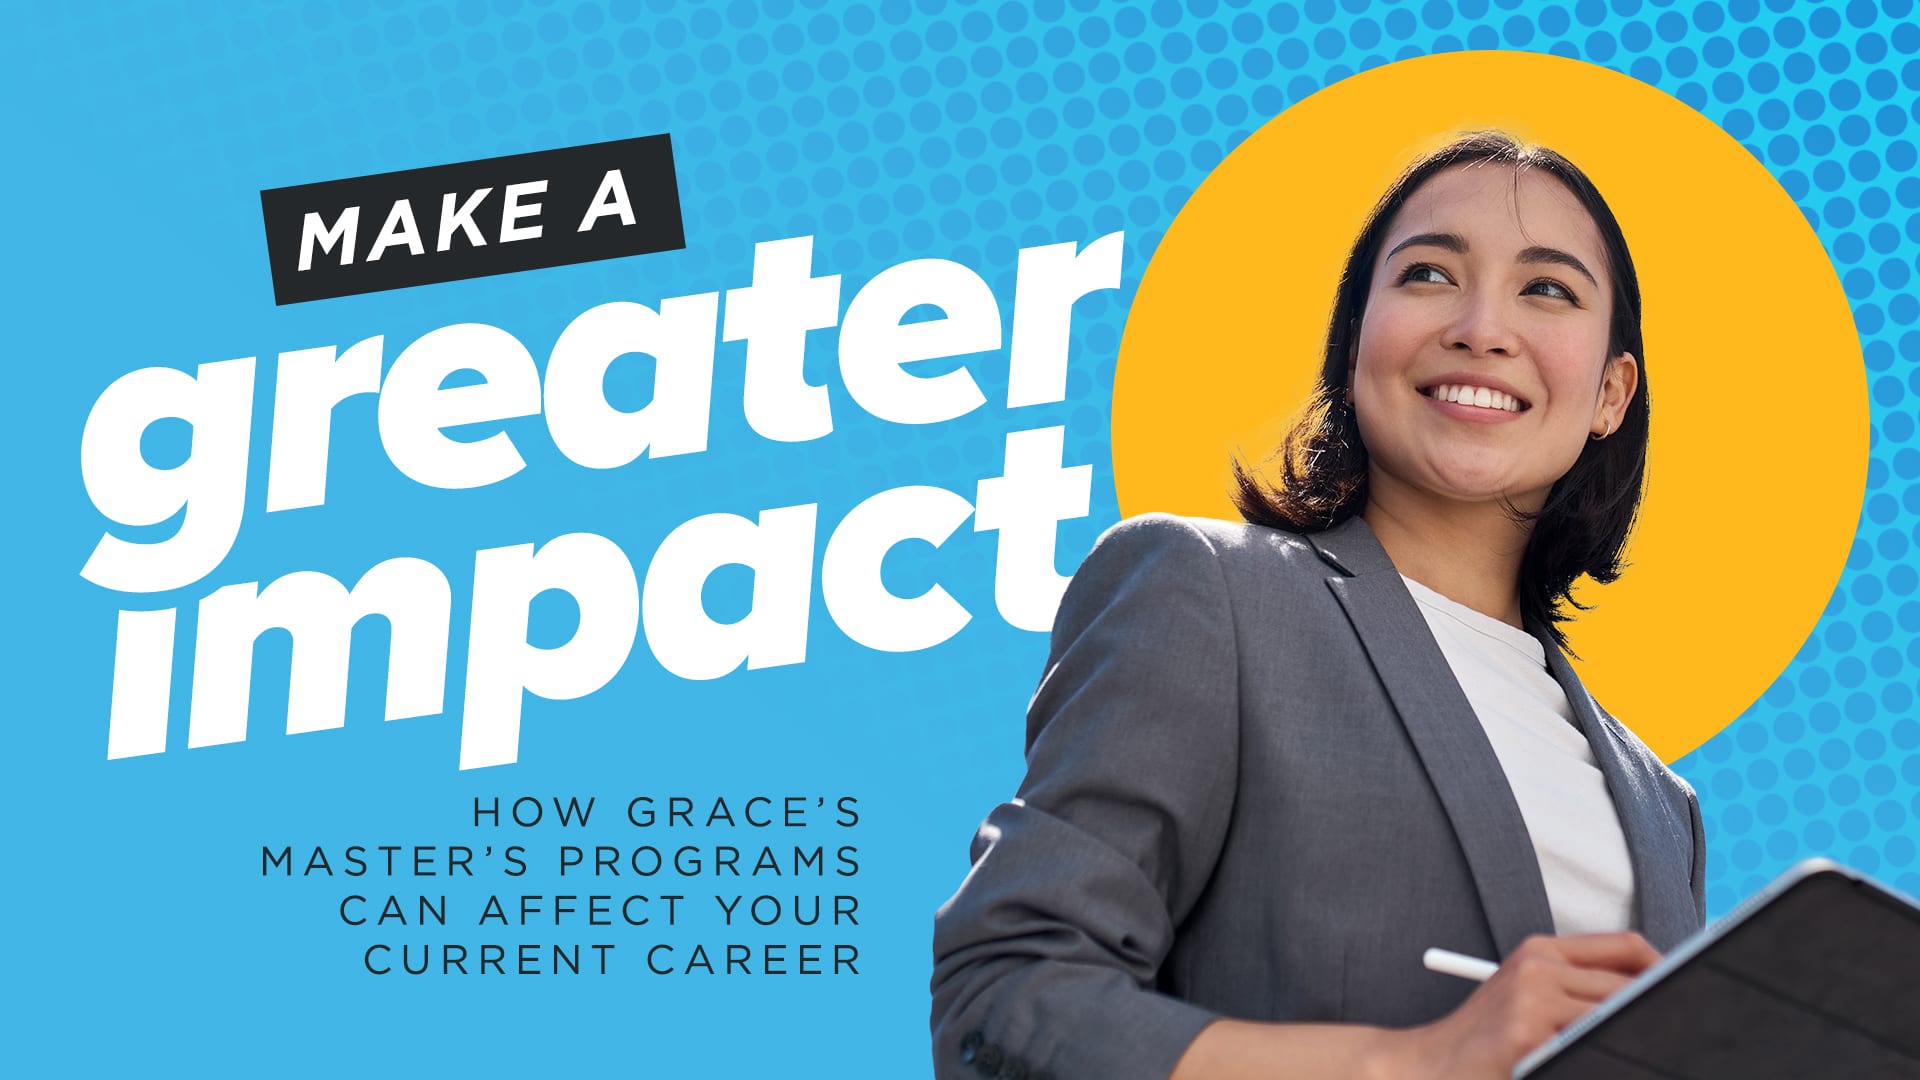 Make a Greater Impact – How Grace’s Master’s Programs Can Affect Your Current Career